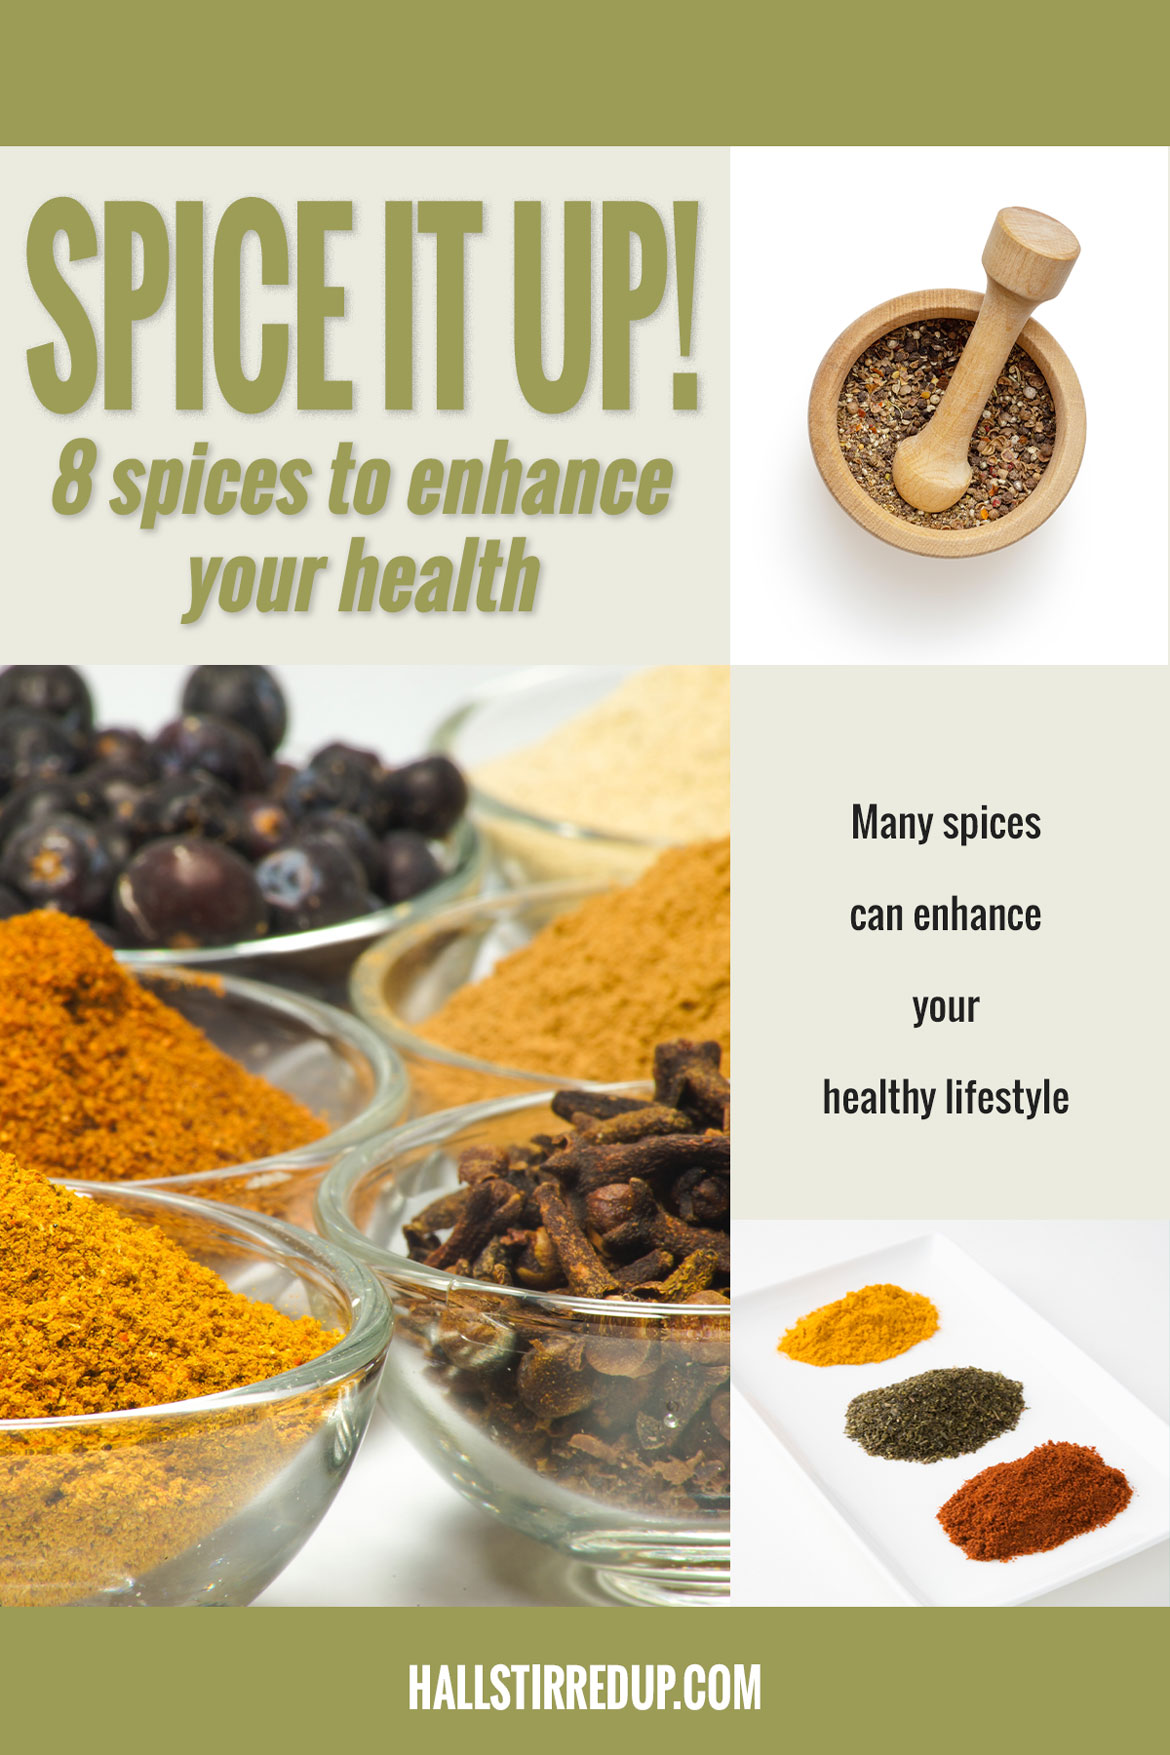 Spice it up 8 spices to enhance your health